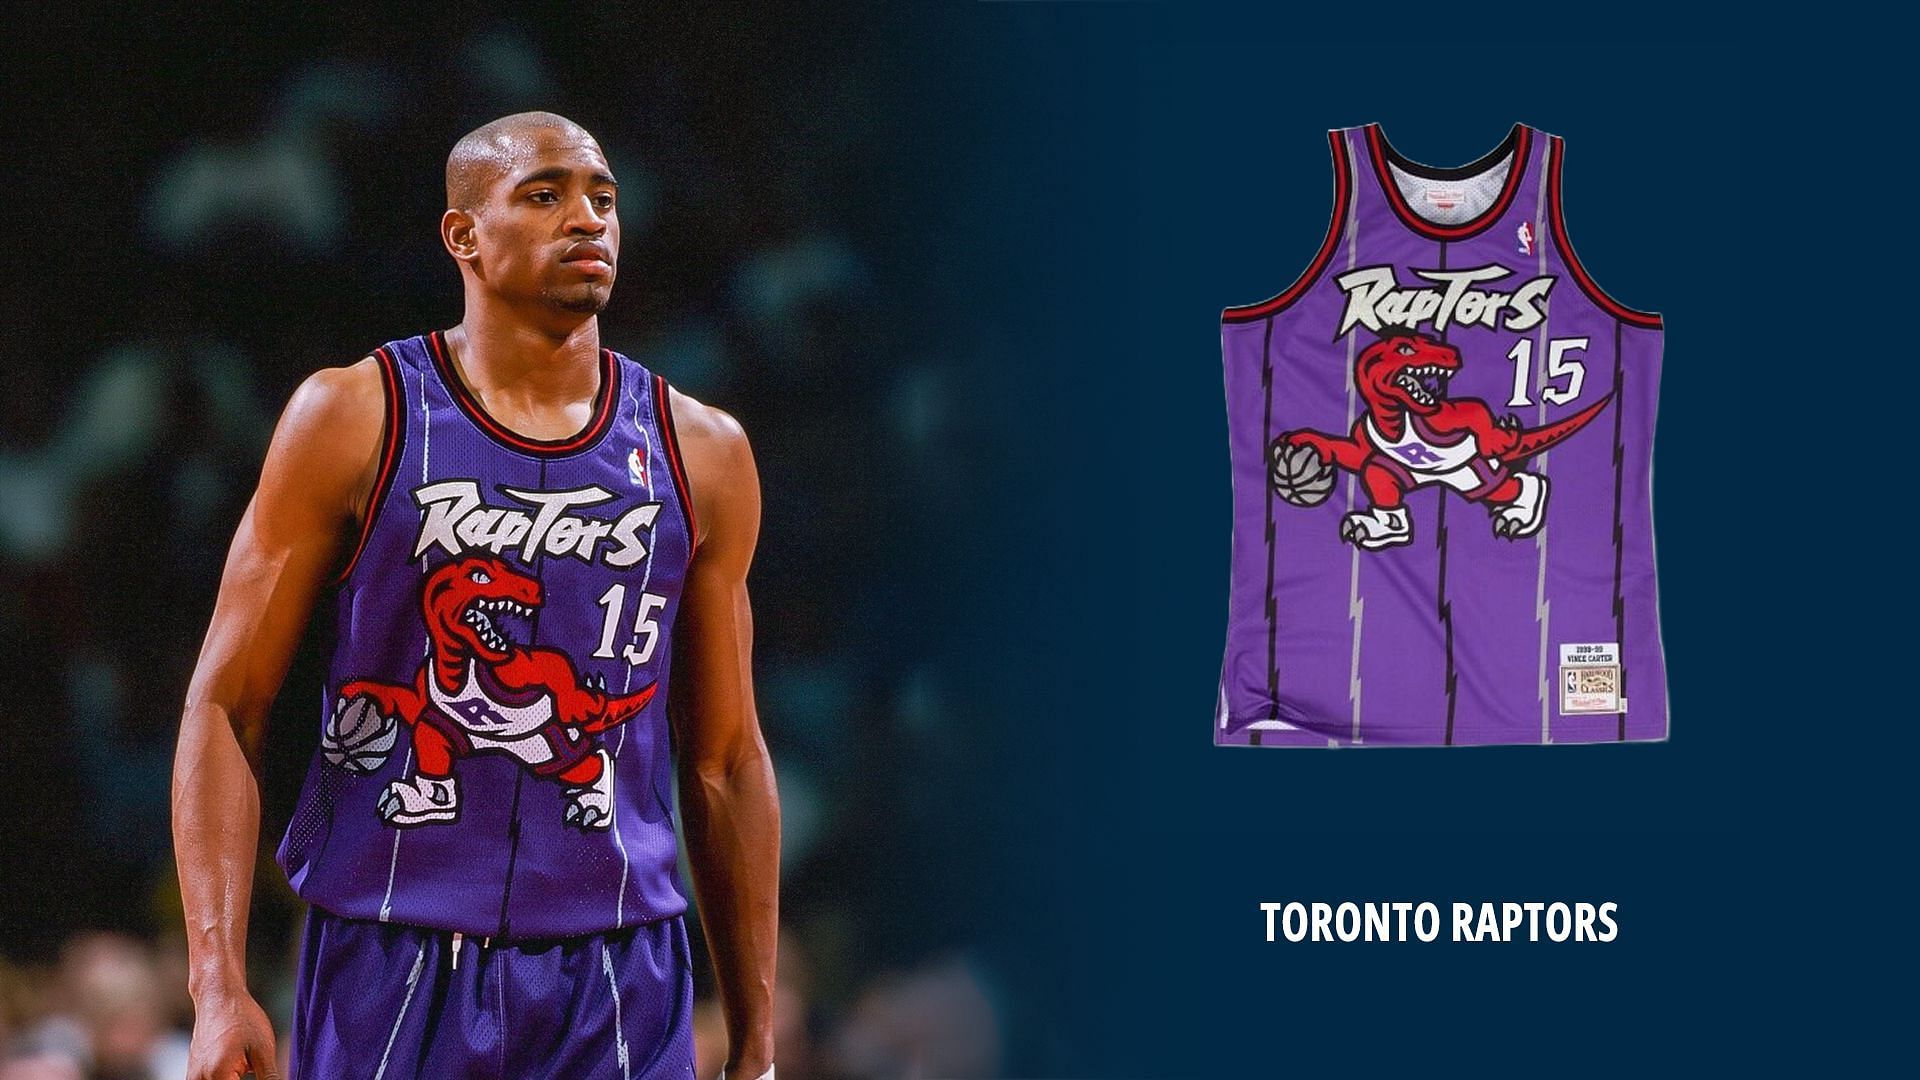 The Raptors had amazing NBA jerseys more than two decades ago